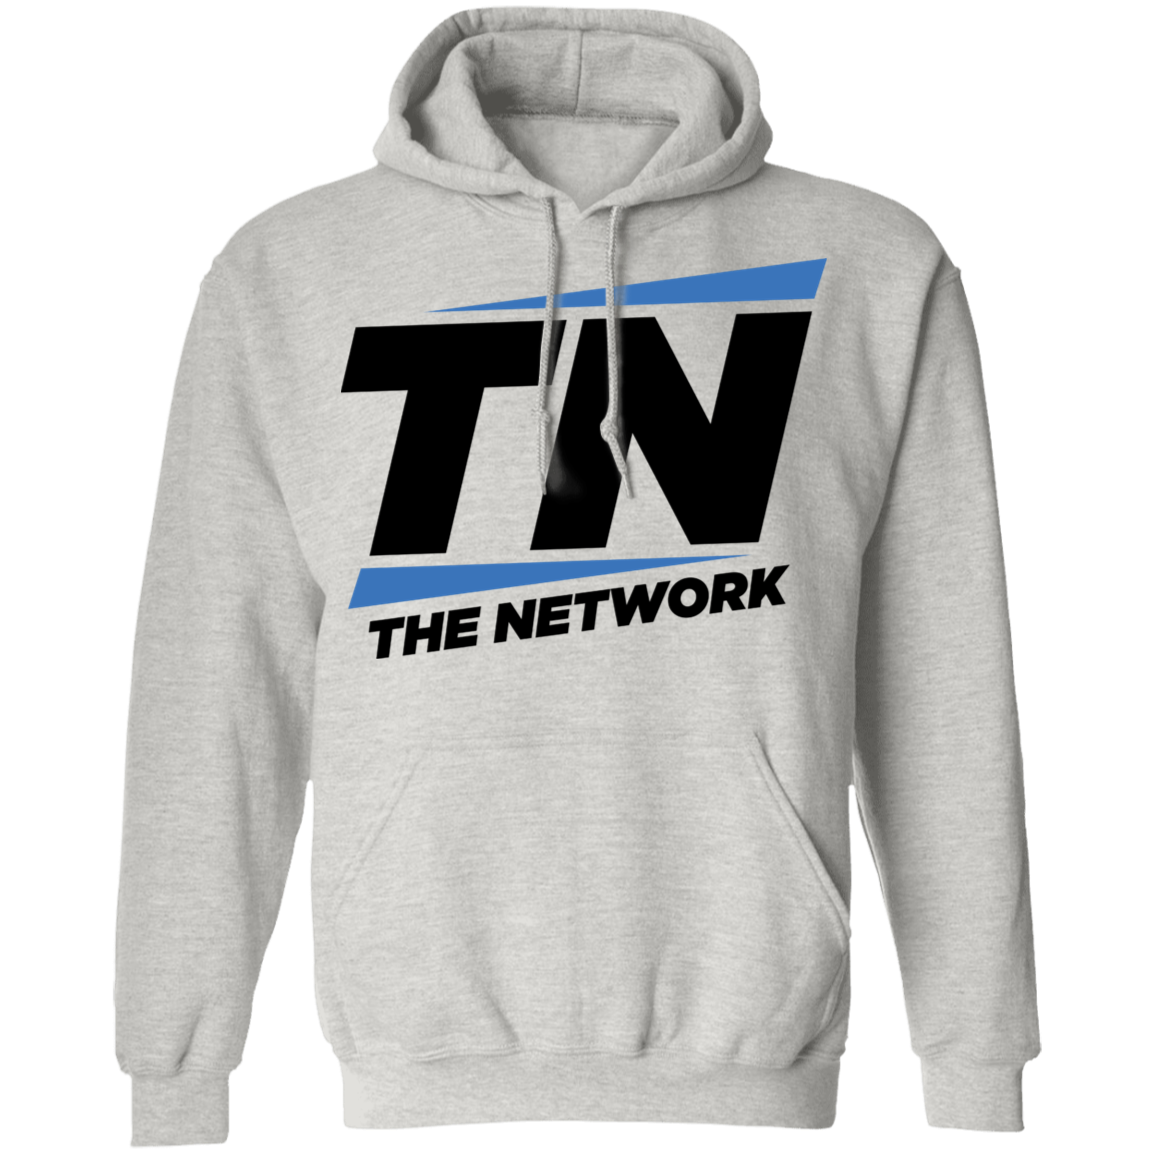 The Network Pullover Hoodie